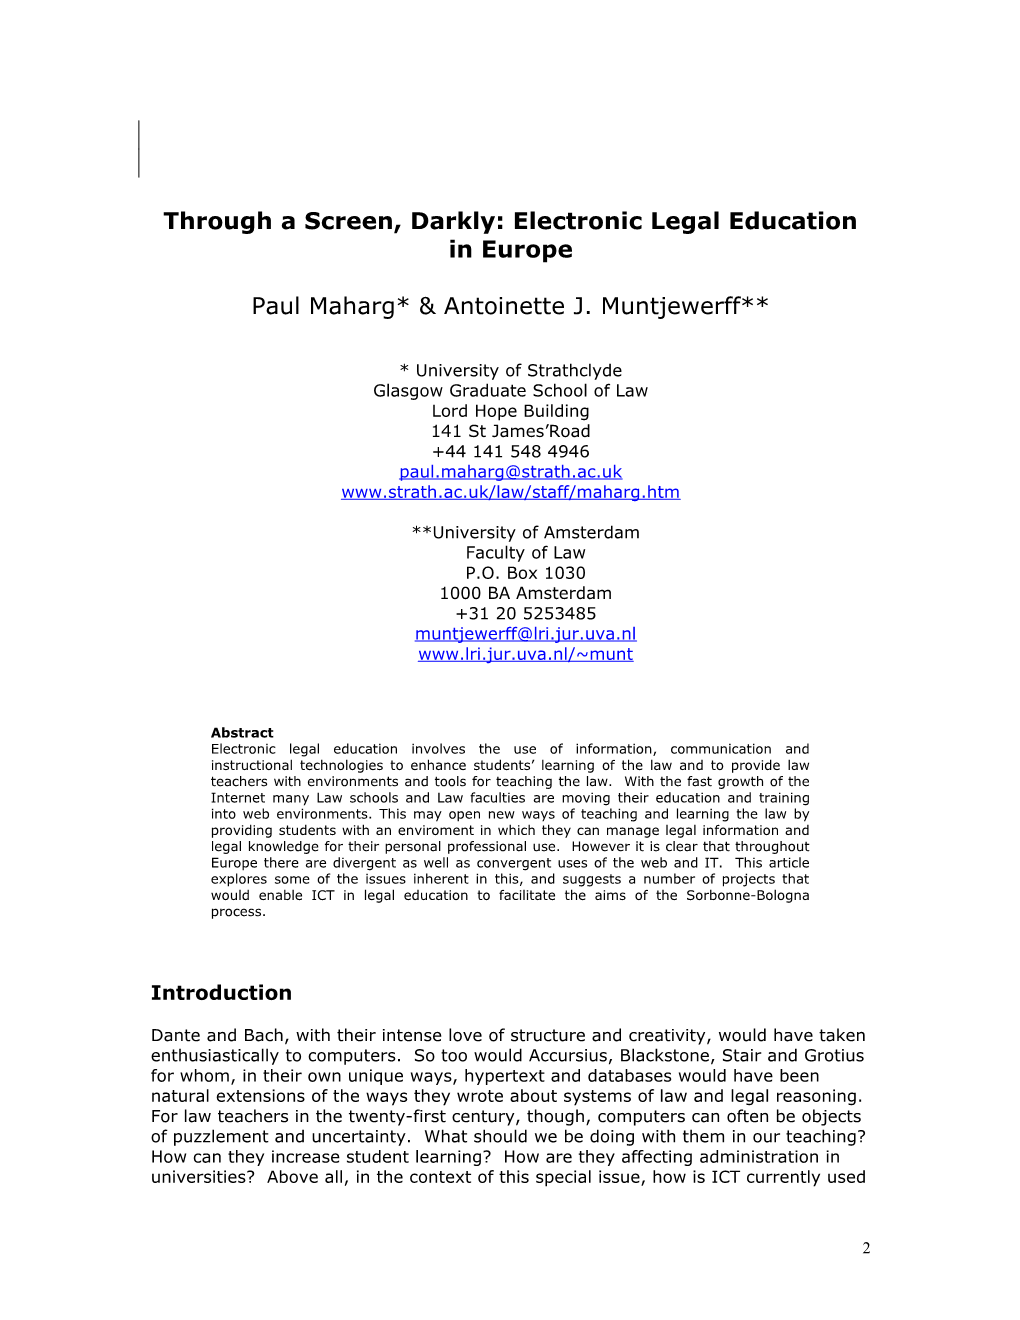 Electronic Legal Education in Europe